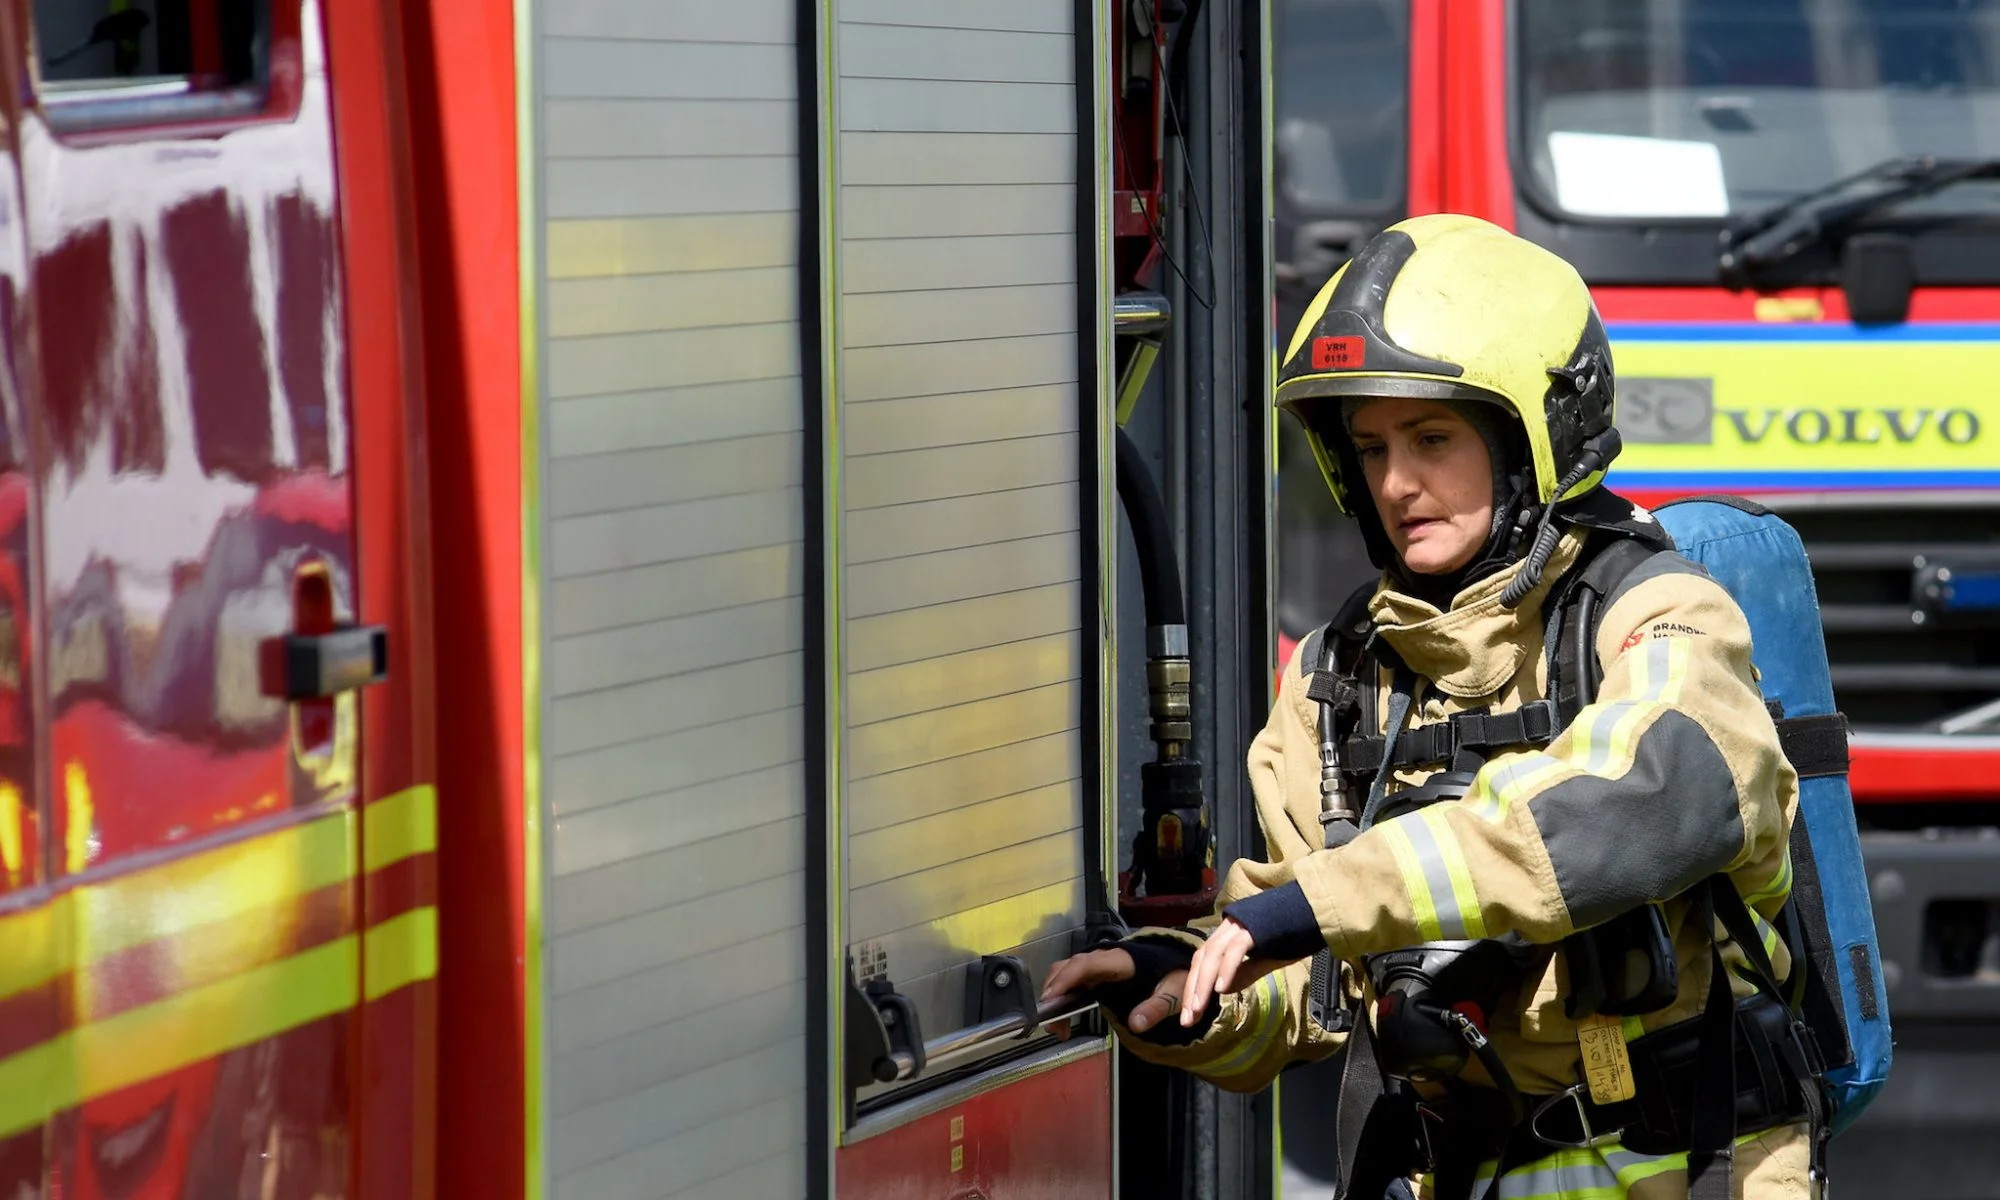 Firefighter opening the fire compartment on a fire appliance